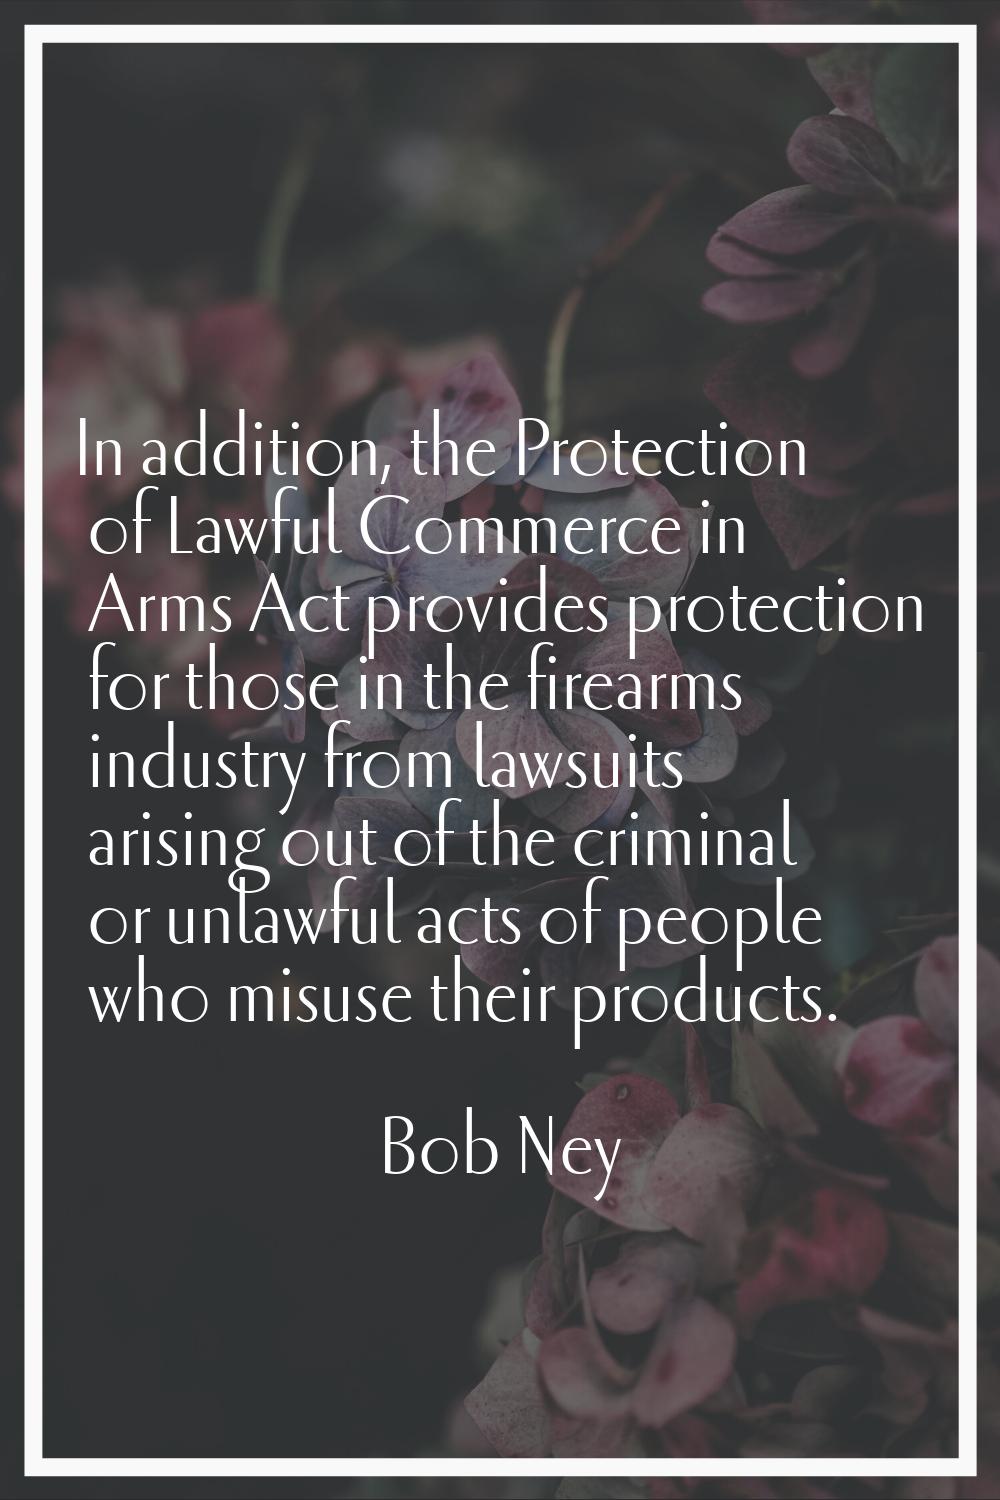 In addition, the Protection of Lawful Commerce in Arms Act provides protection for those in the fir